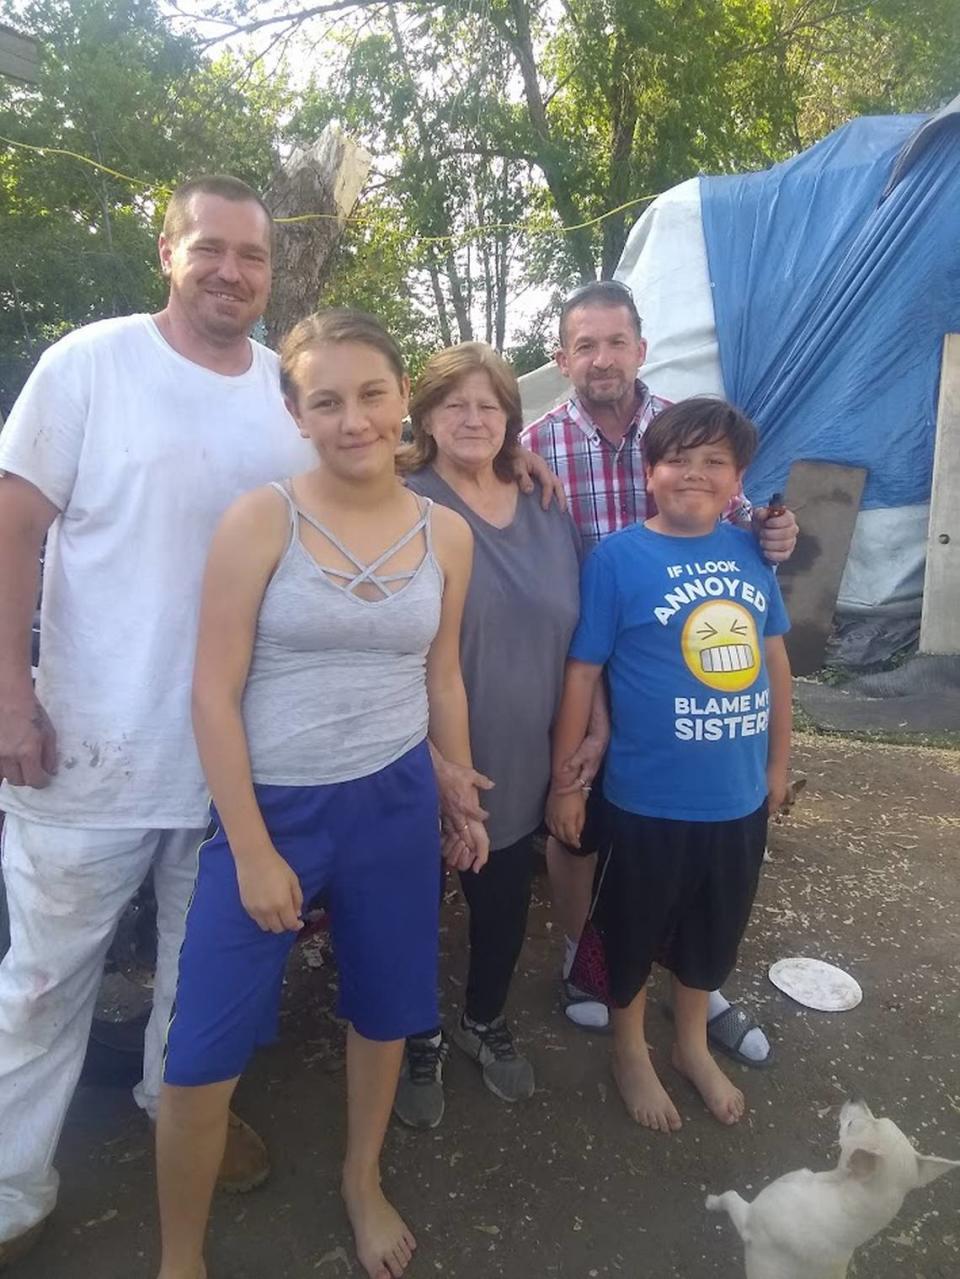 Angelica Santos, pictured here with her family, was a sixth-grade student when she told friends that she was dating a Yakima police officer in 2019. Courtesy Samantha Deluna